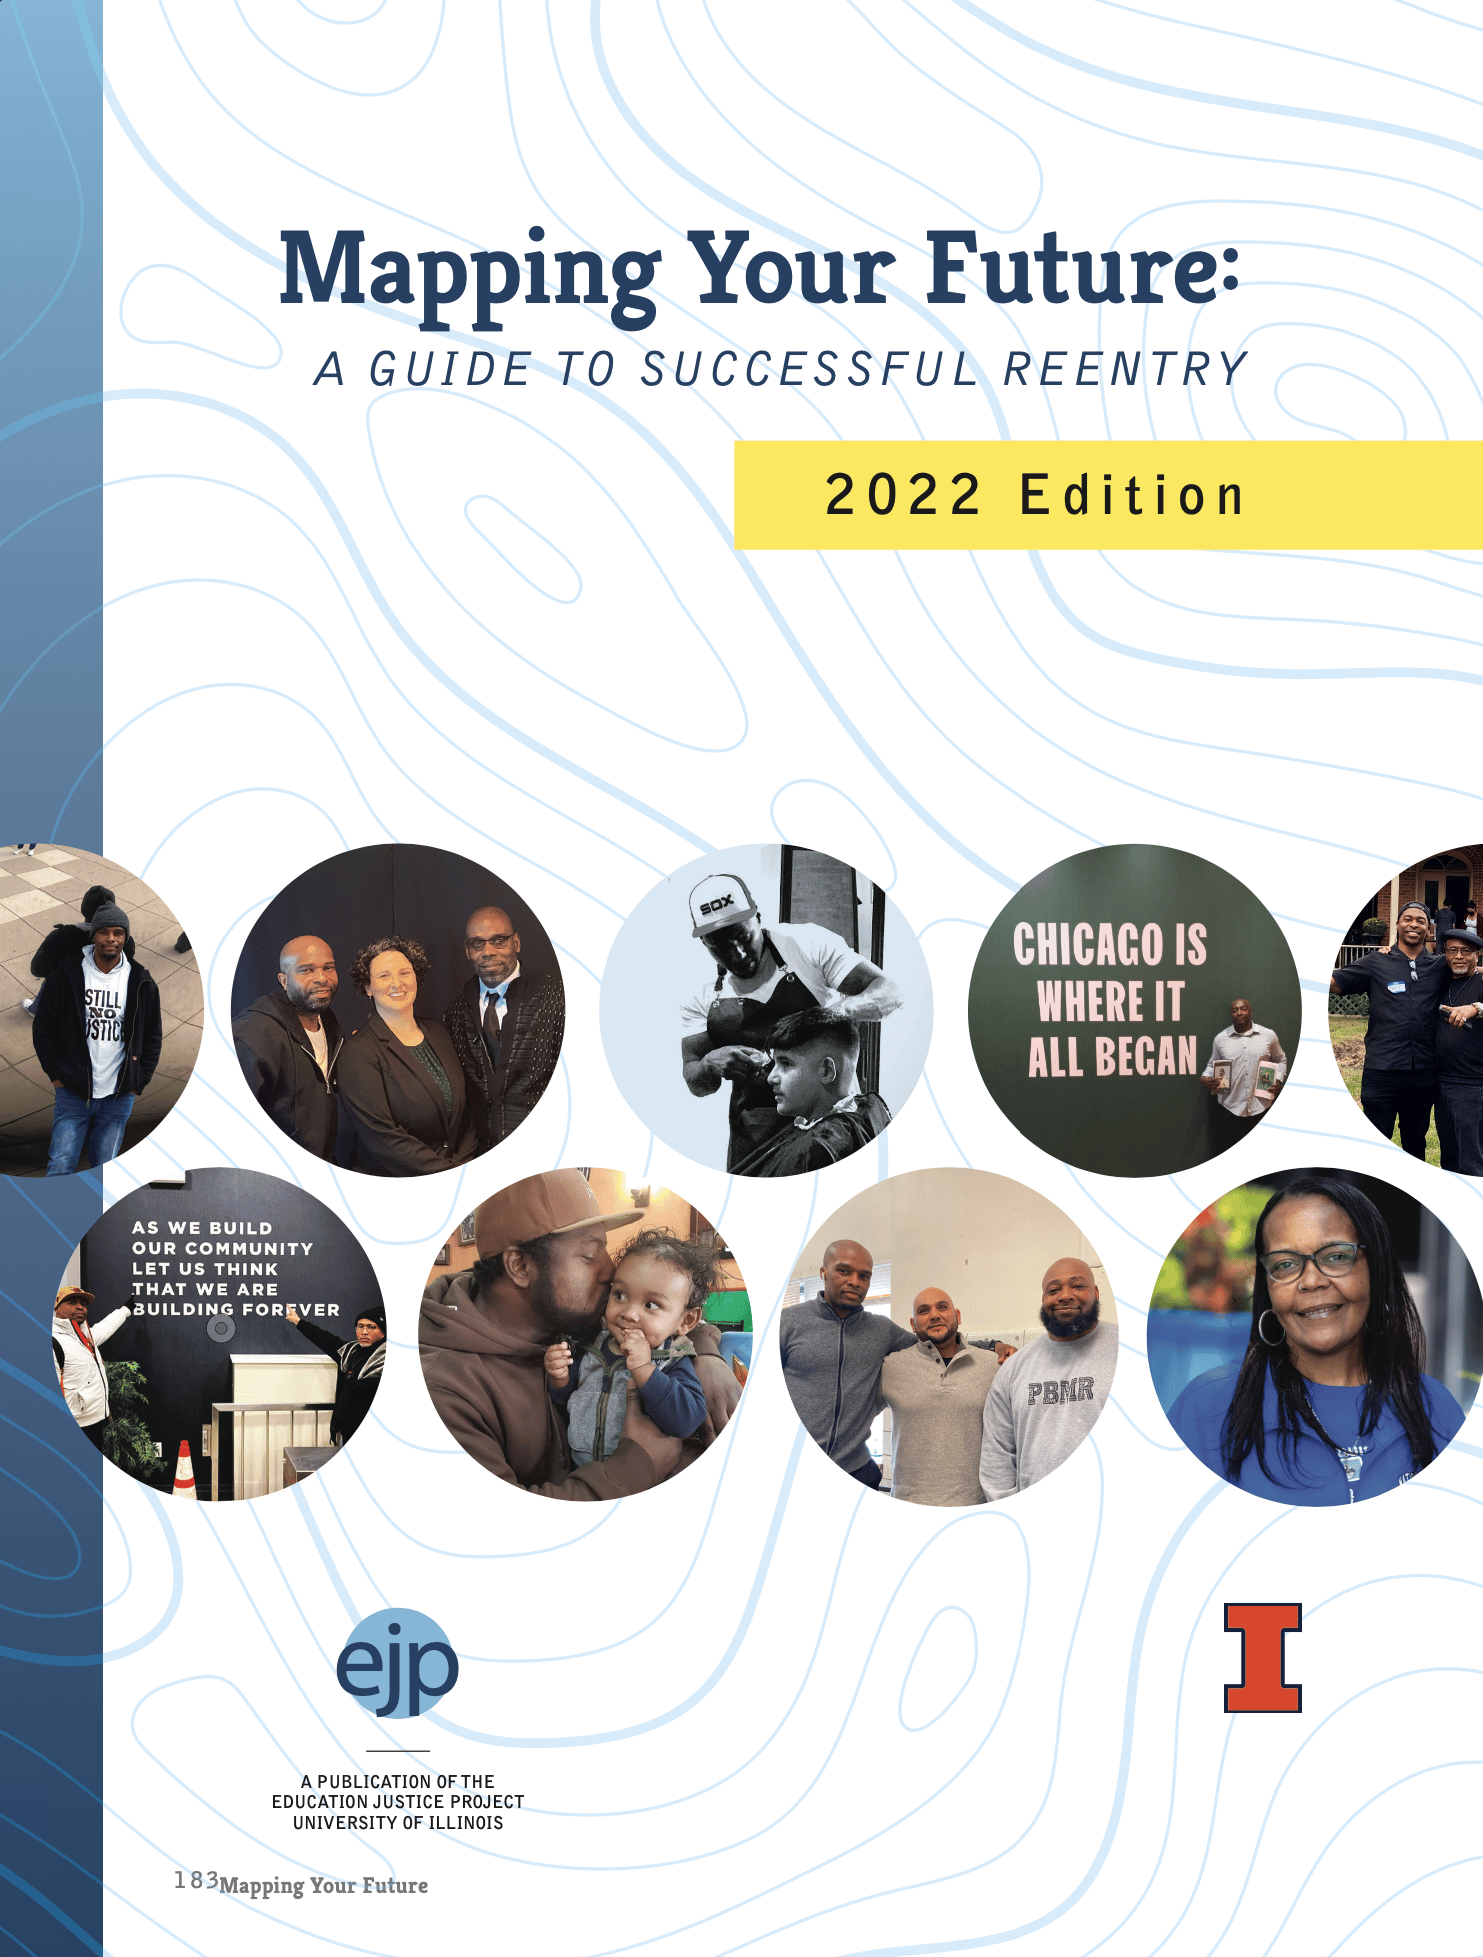 Mapping Your Future: A Guide to Successful Reentry